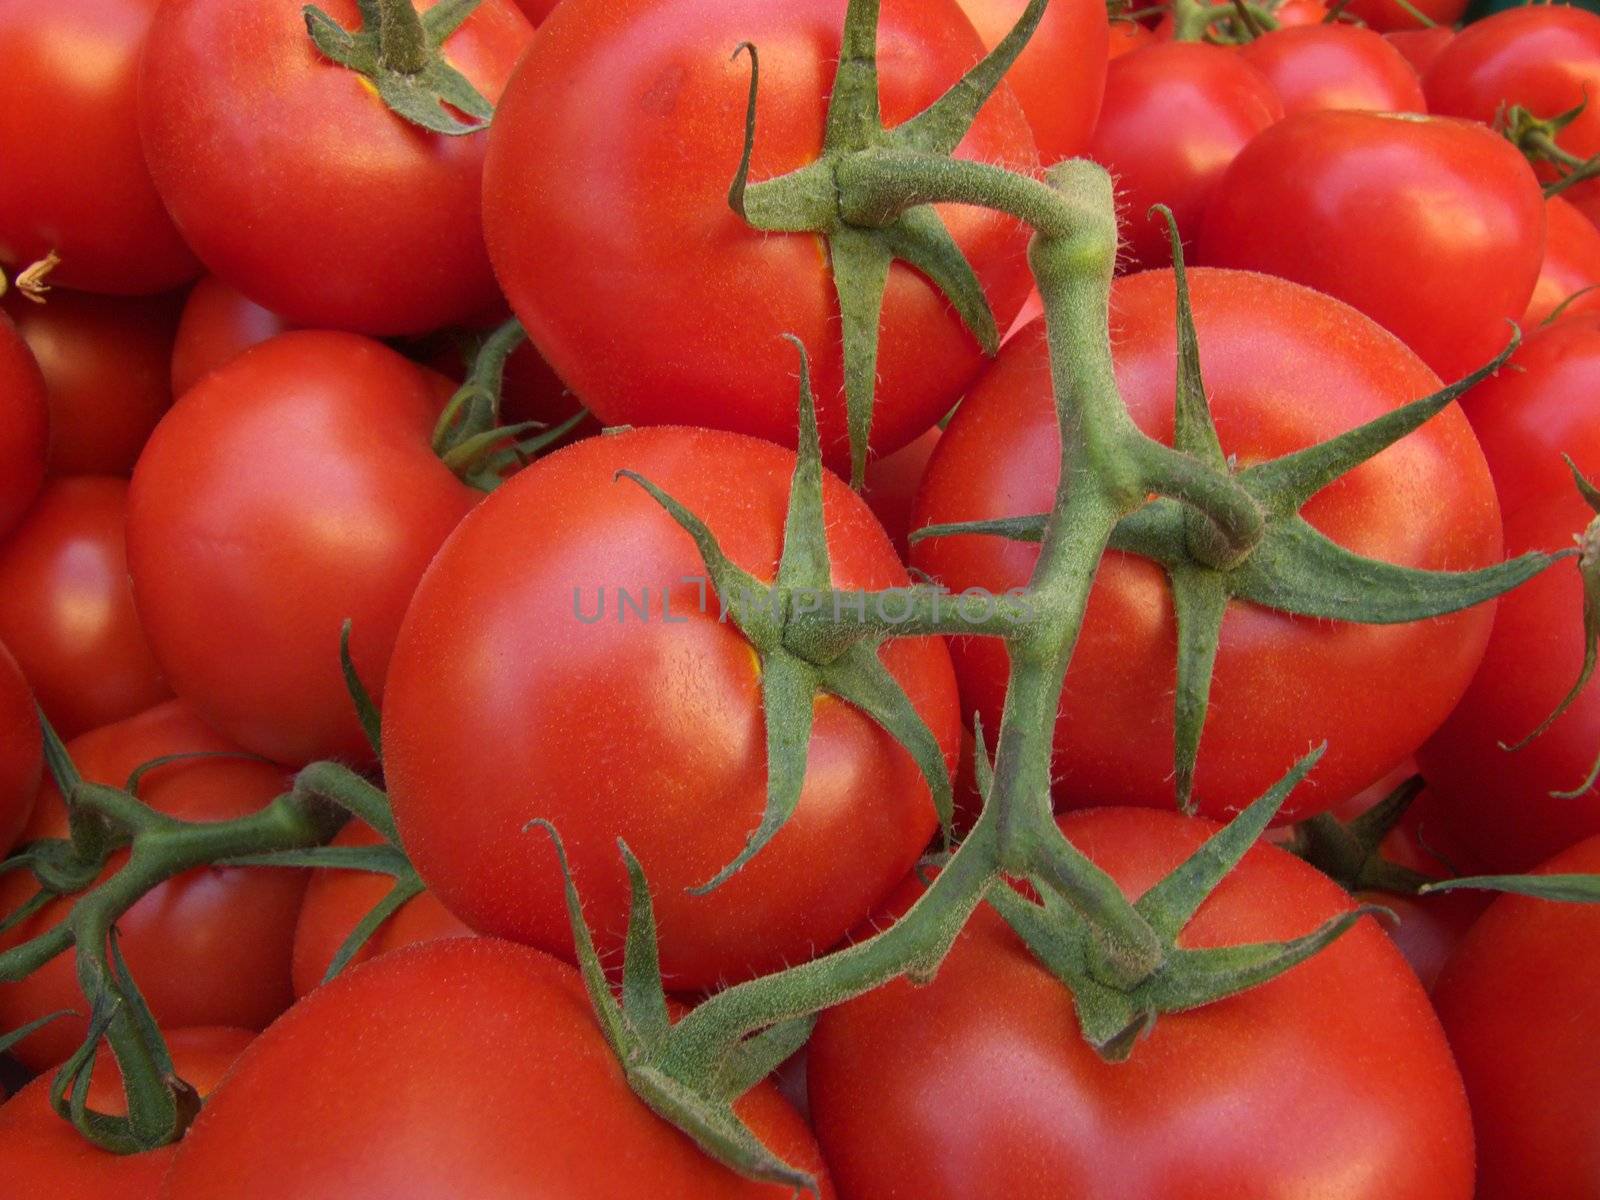 an image showing some tomatoes at the market